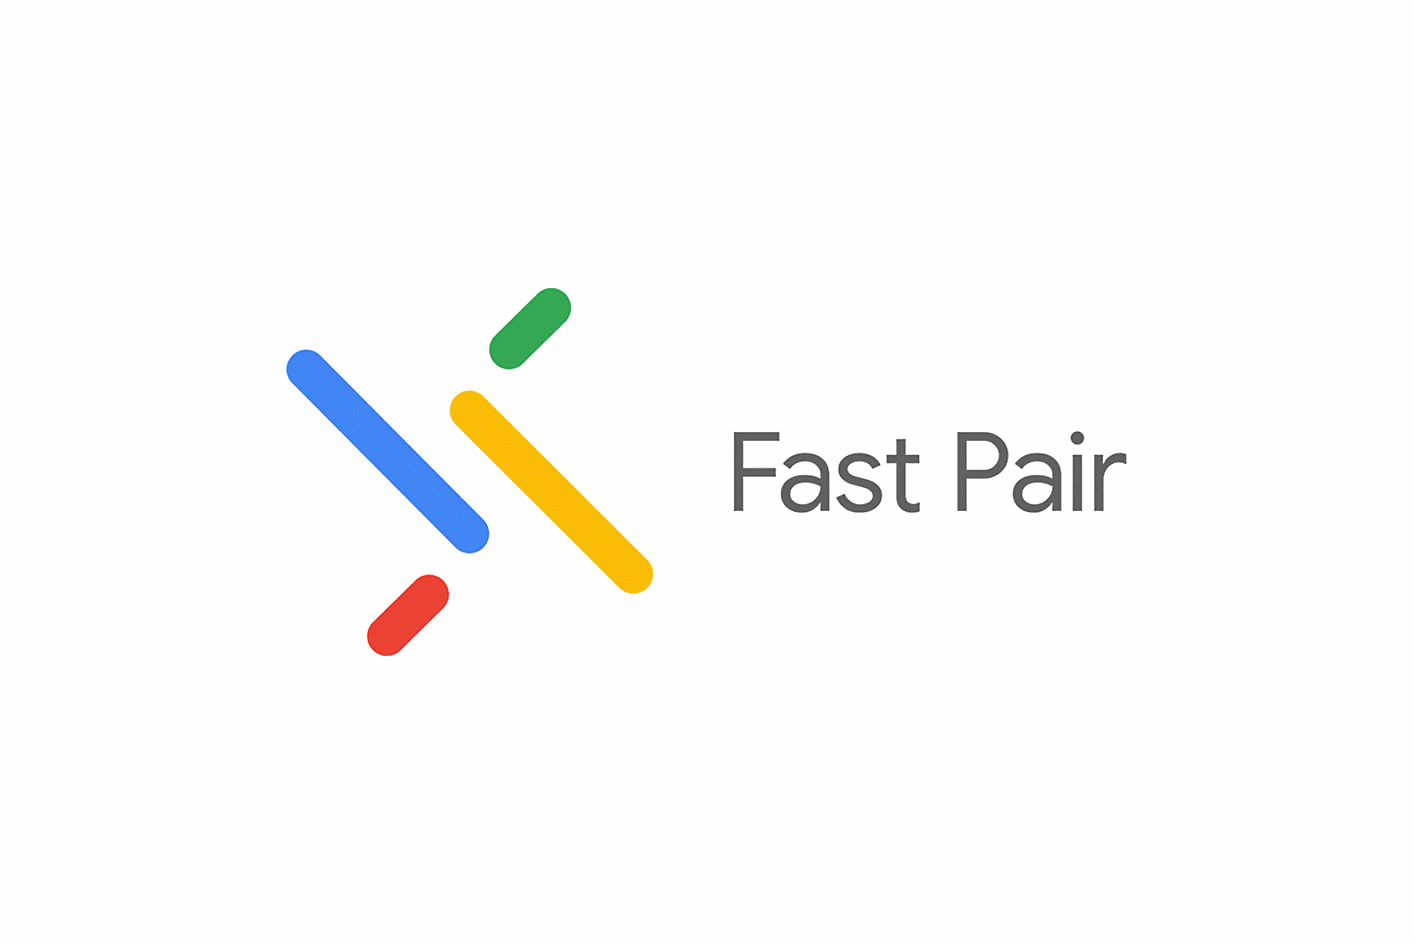 Image of a fast pair logo